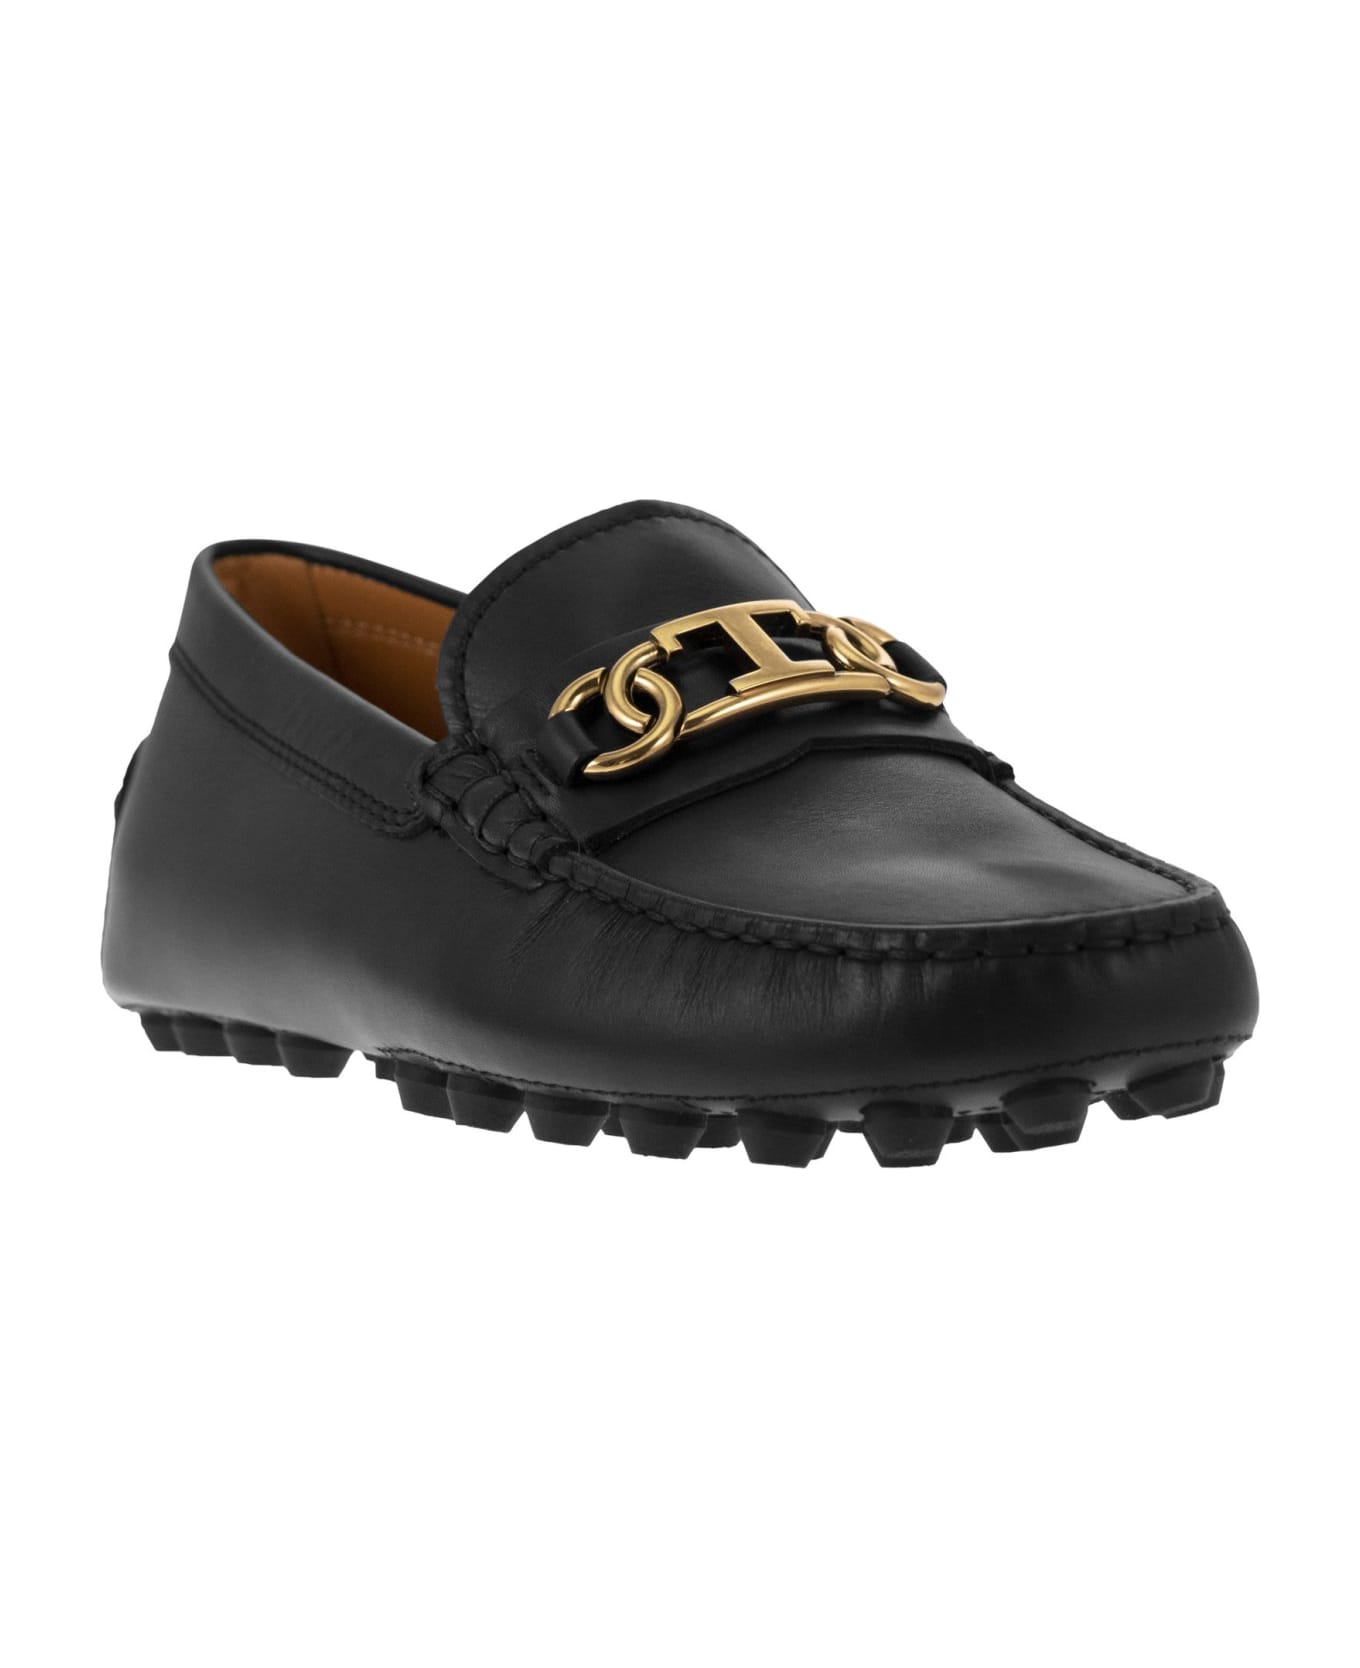 Tod's Leather Moccasin - Black フラットシューズ